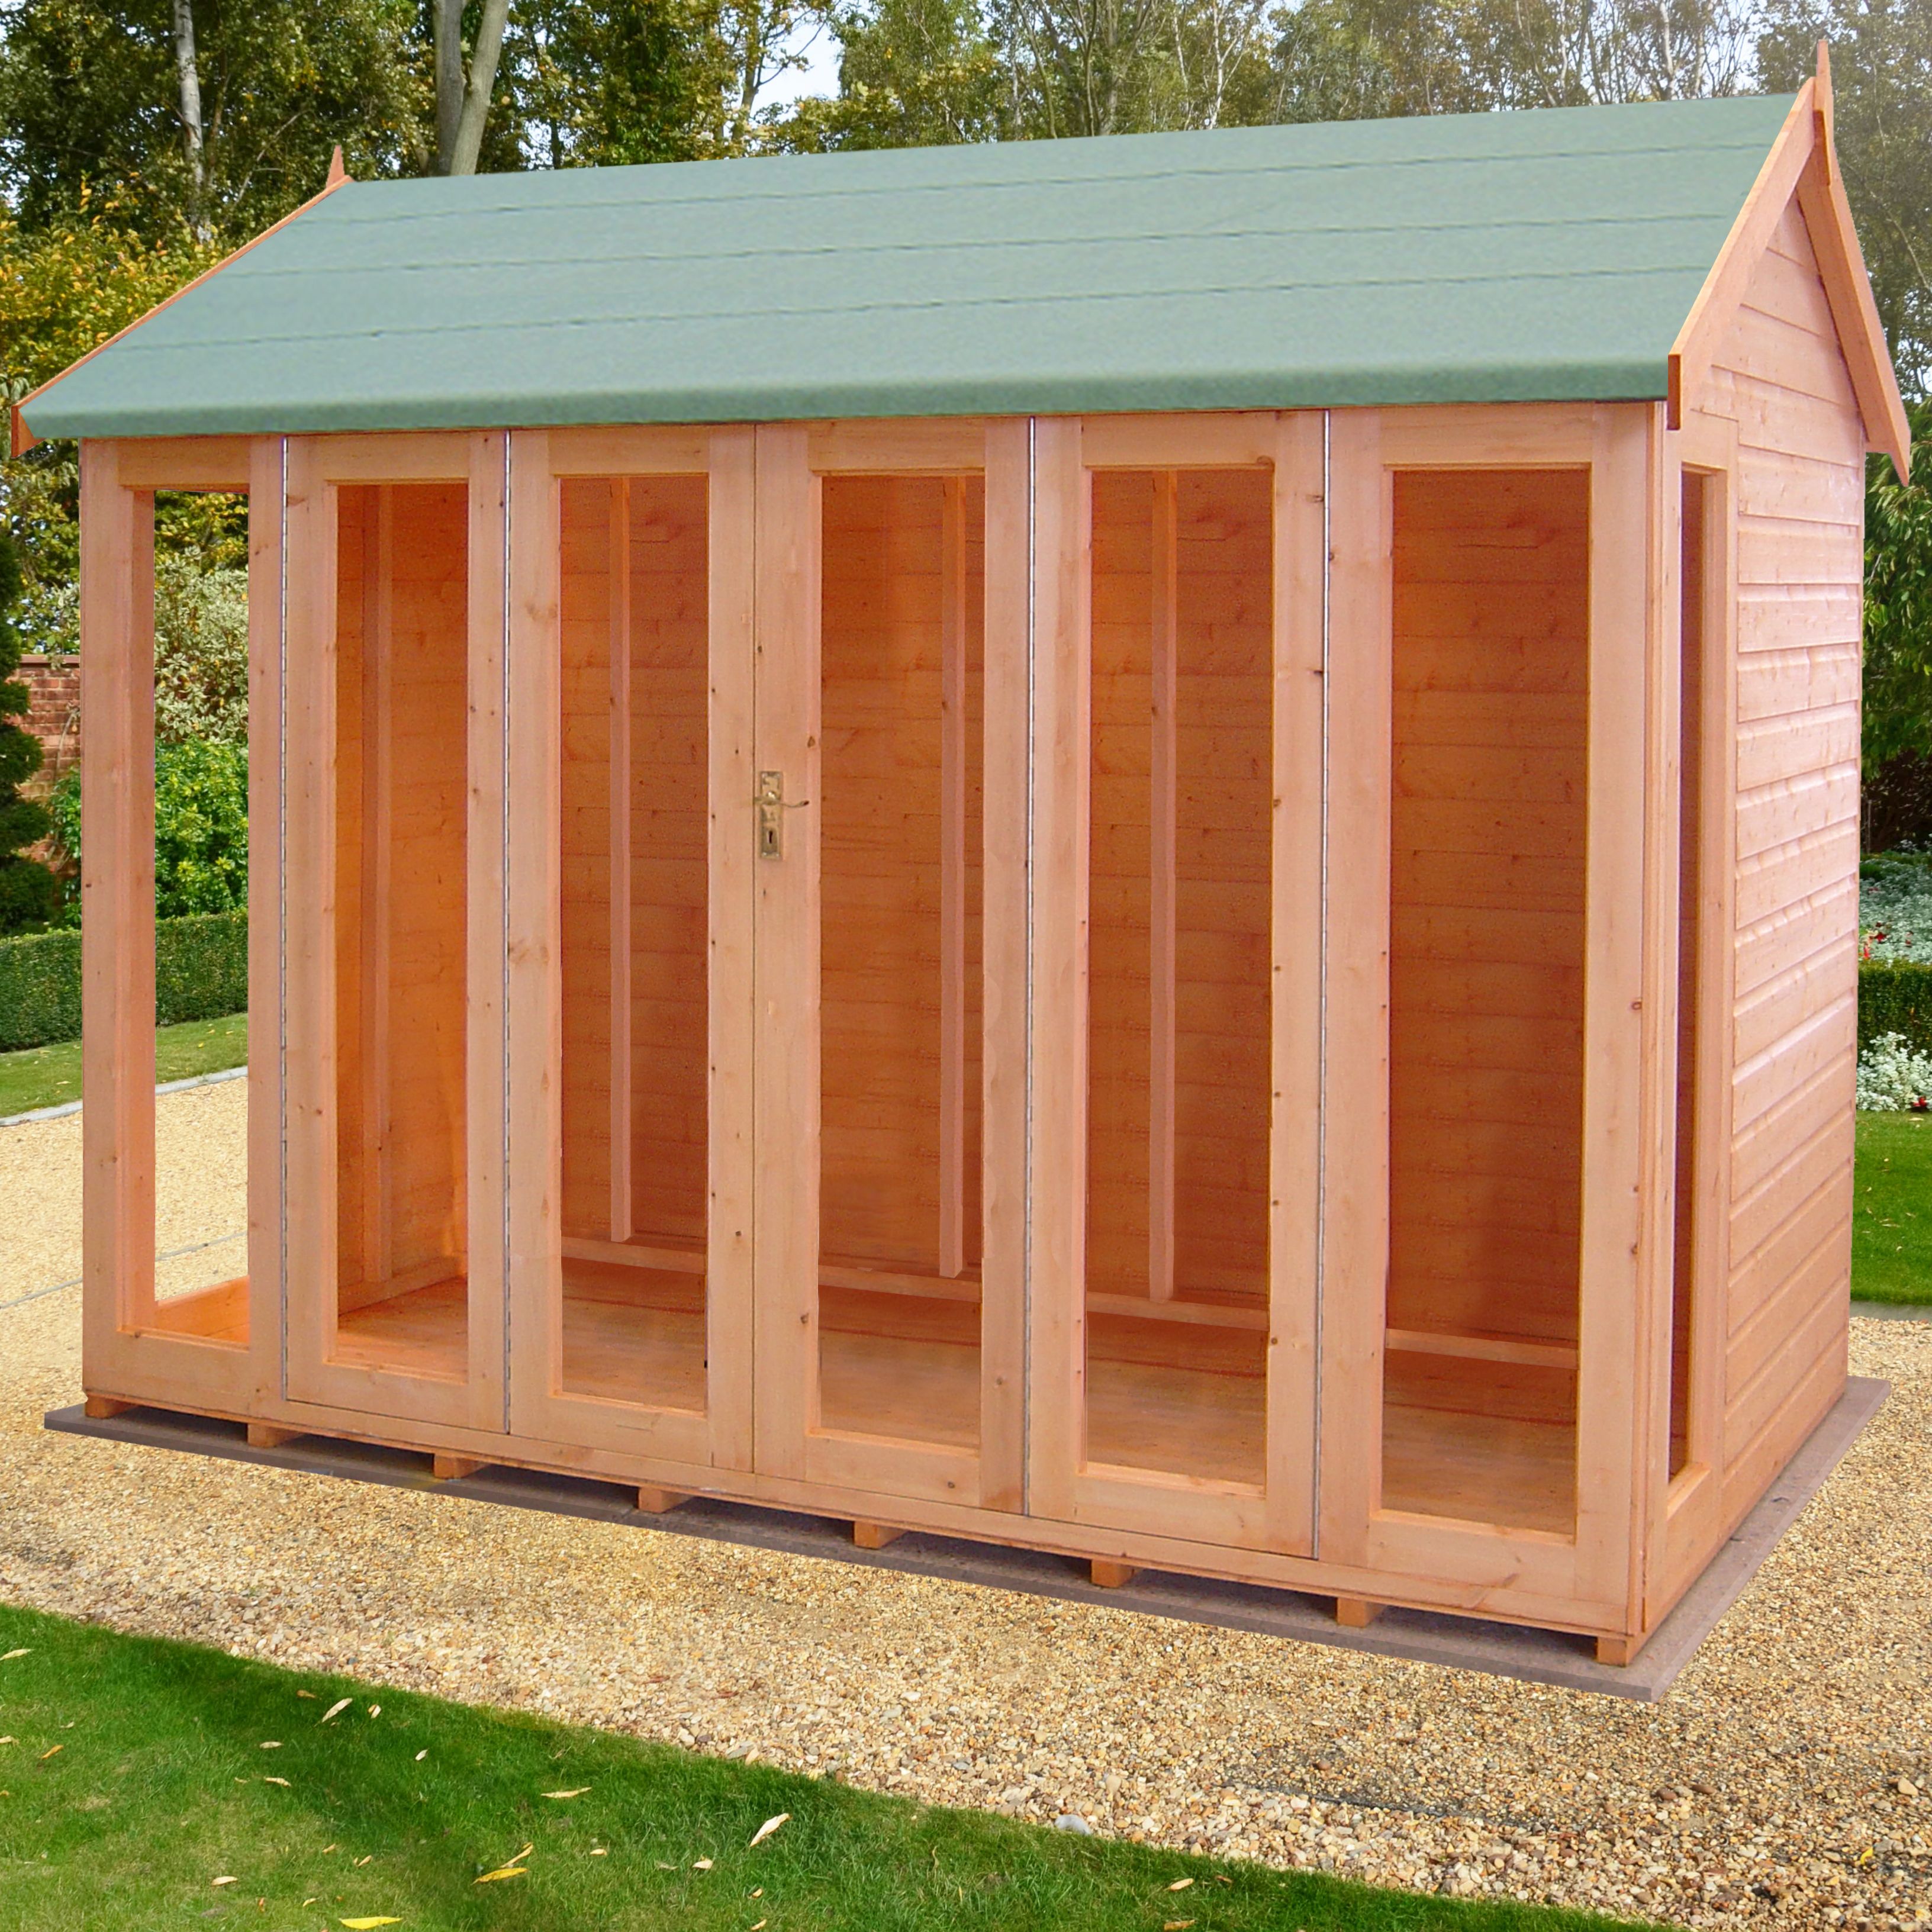 Shire Blenheim 10x8 ft with Bi-fold door & 2 windows Apex Wooden Summer house - Assembly service included